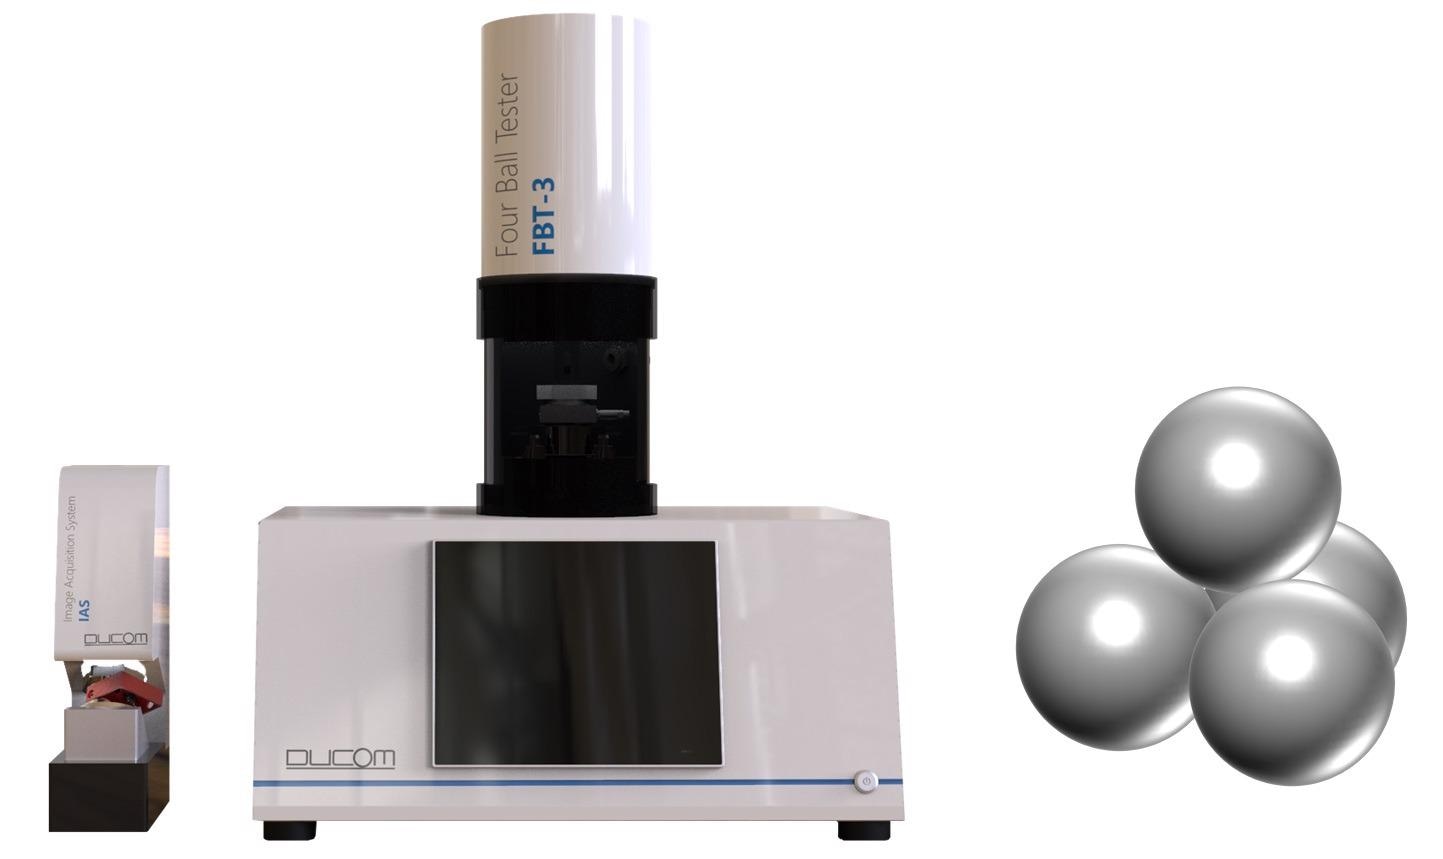 Ducom Four Ball Tester (FBT-3) is a bench top tribometer powered by automation and precision measurement system for lubricant characterization. FBT-3 enables data reproducibility that delivers  productivity and efficiency in scientific research